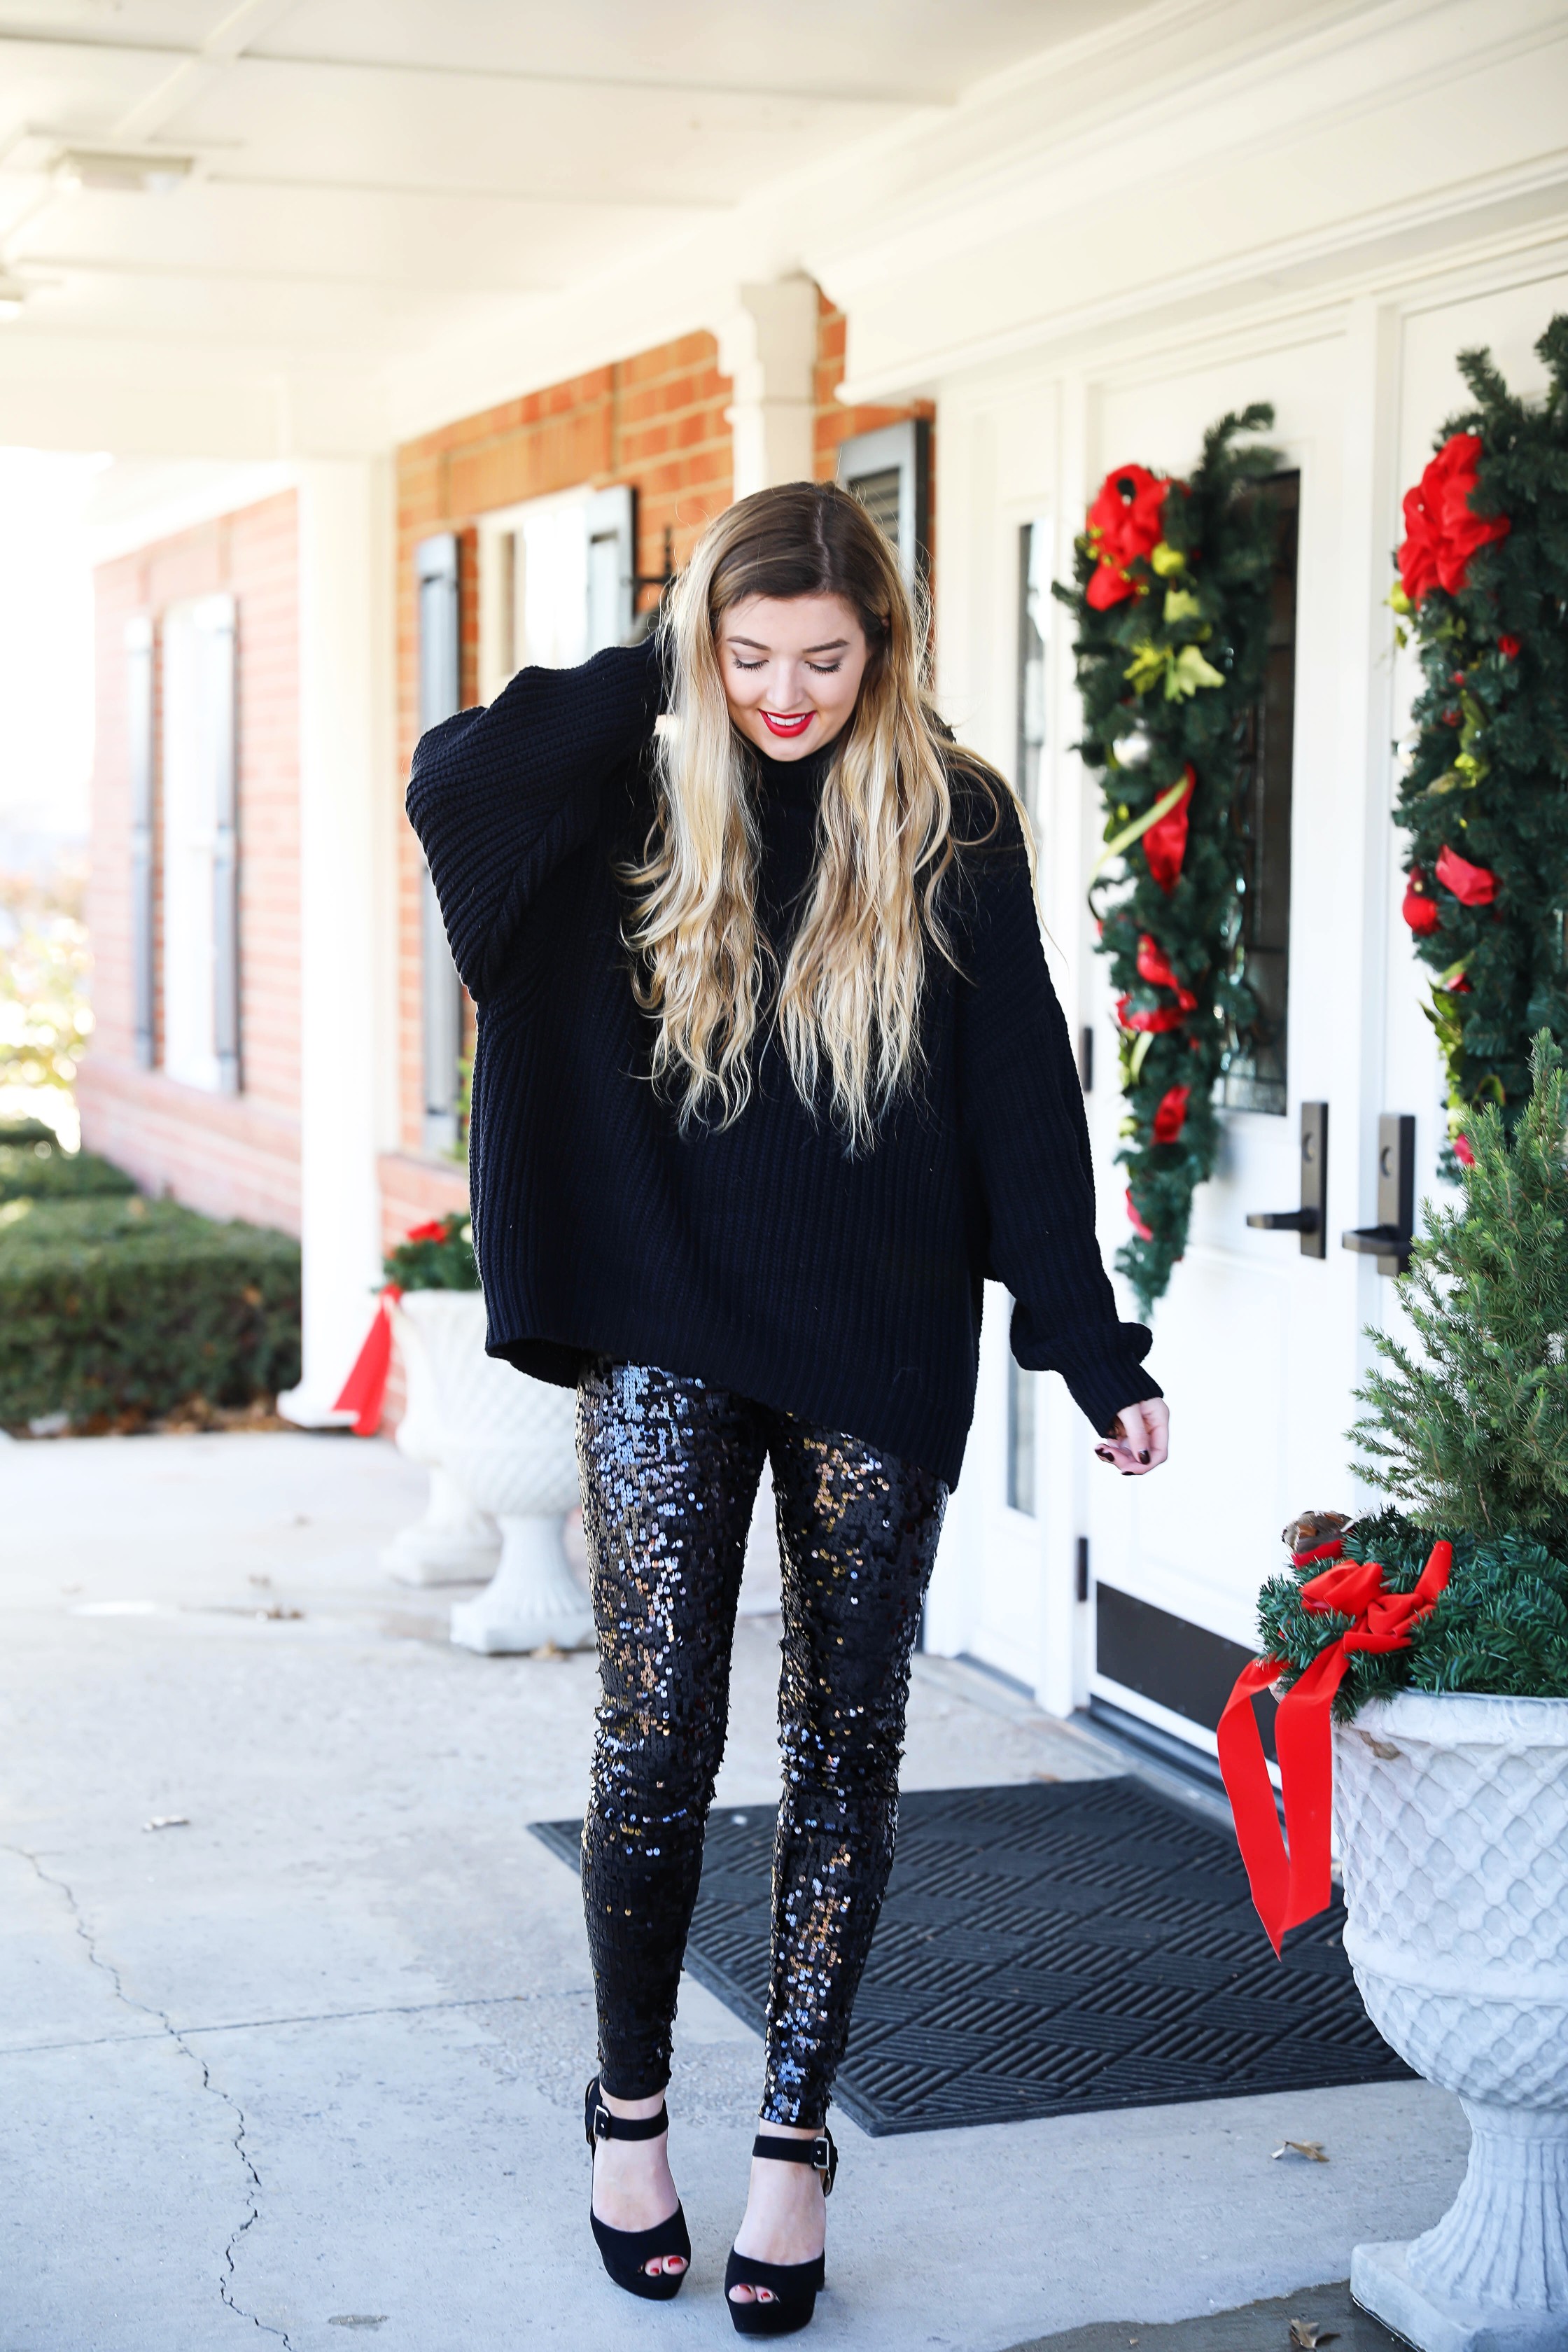 New Years eve outfit idea! Sequin pants and a black sweater, perfect for NYE! How to style sequin pants for nye! Details on fashio blog daily dose of charm by lauren lindmark